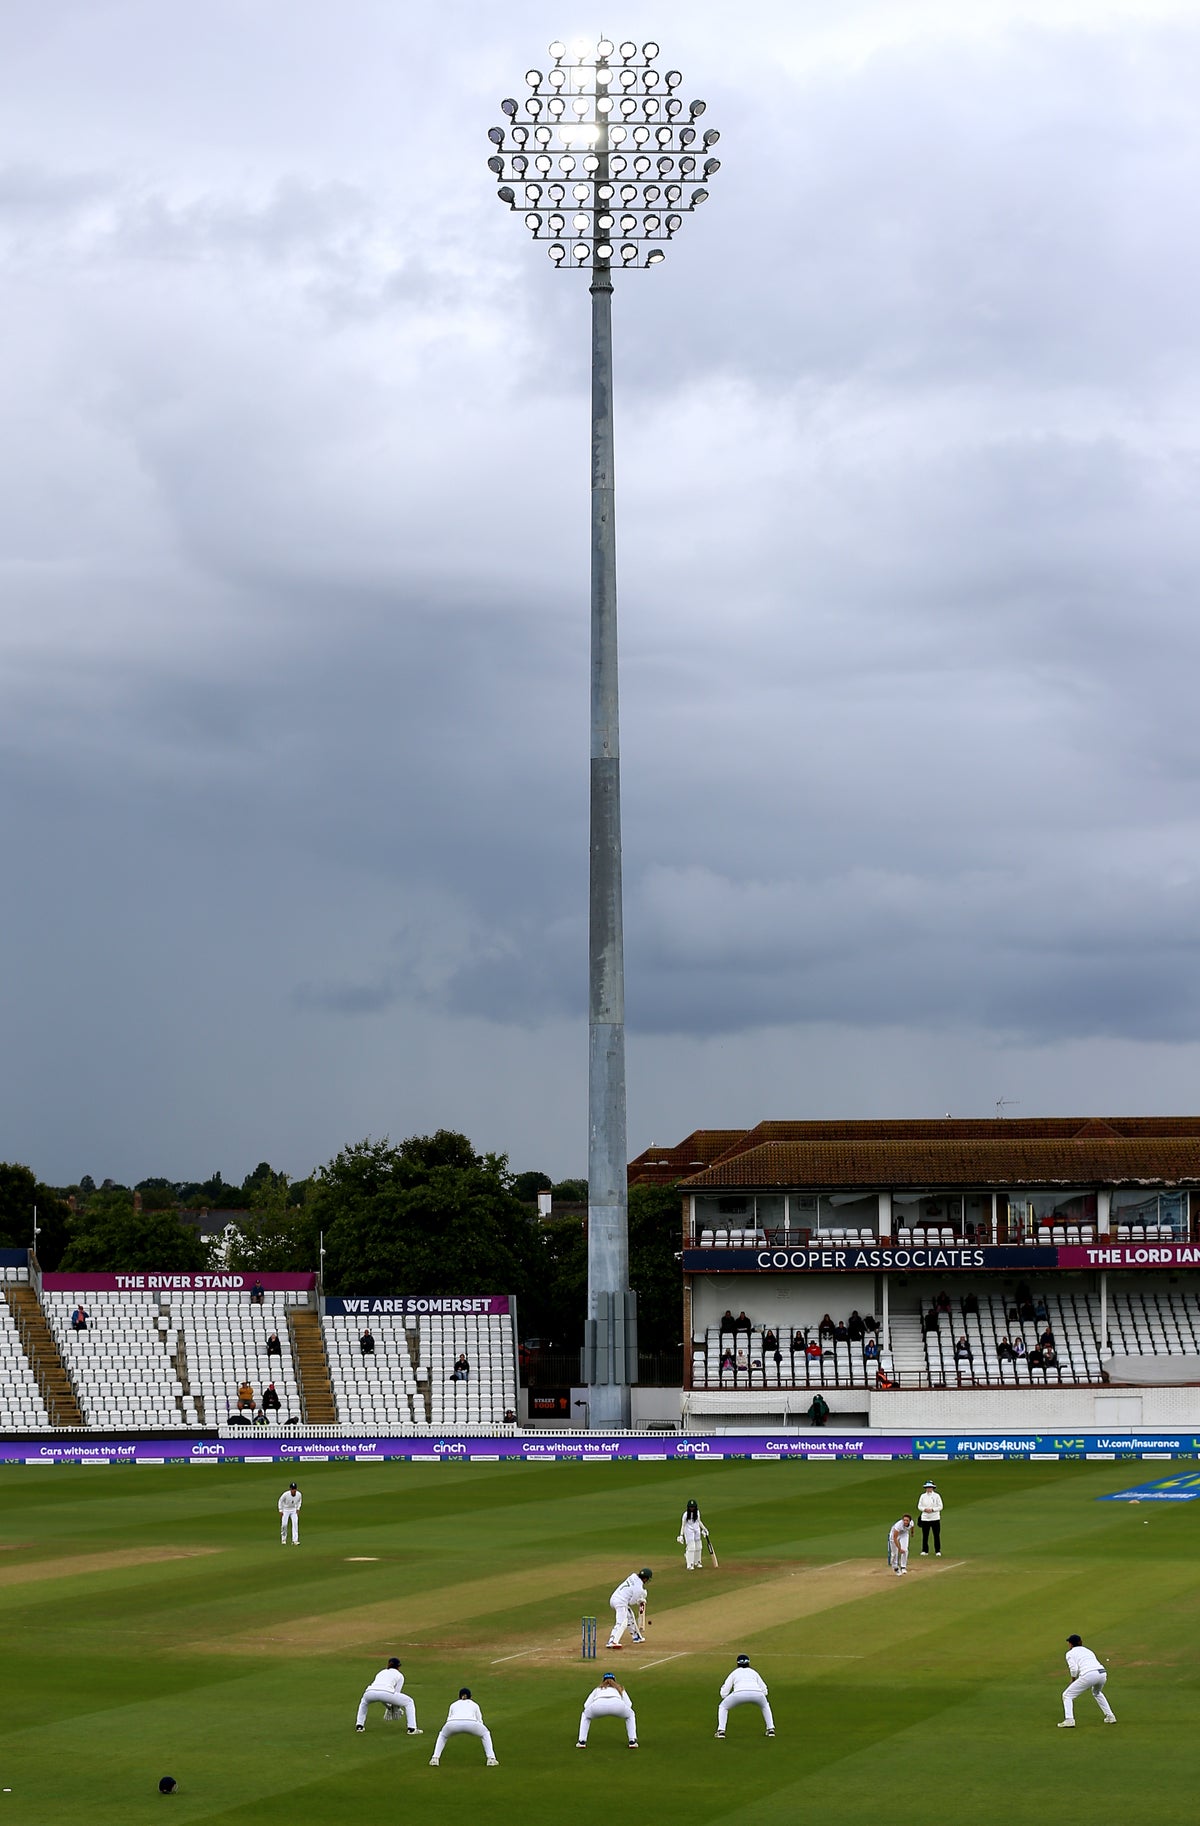 England’s hopes of rare home Test victory dashed by bad weather at Taunton